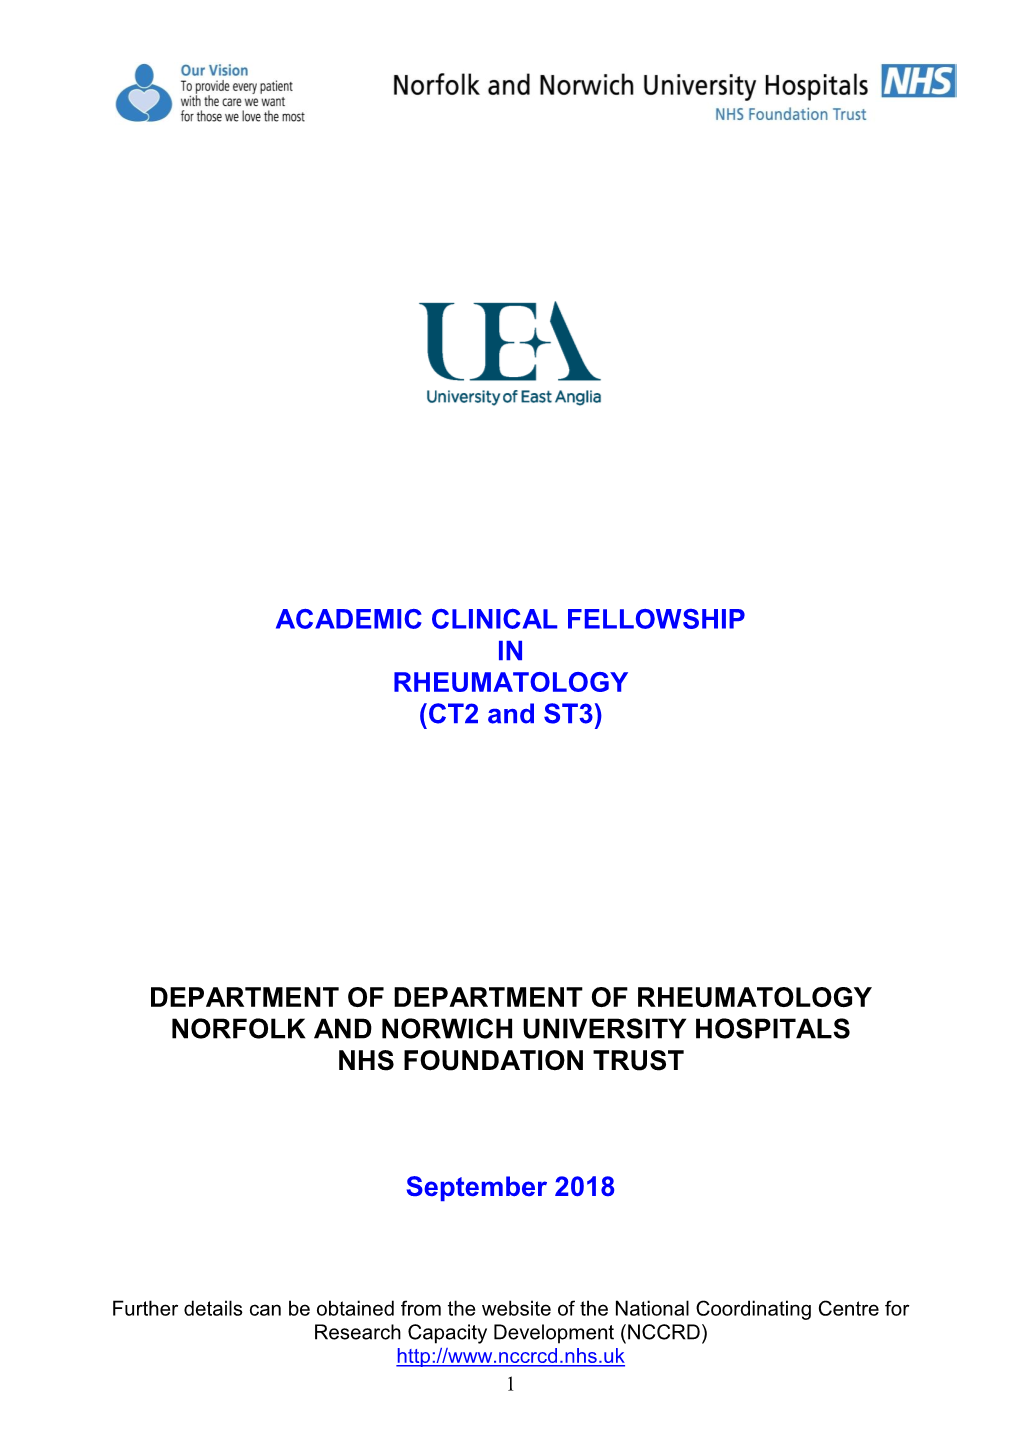 ACADEMIC CLINICAL FELLOWSHIP in RHEUMATOLOGY (CT2 and ST3)